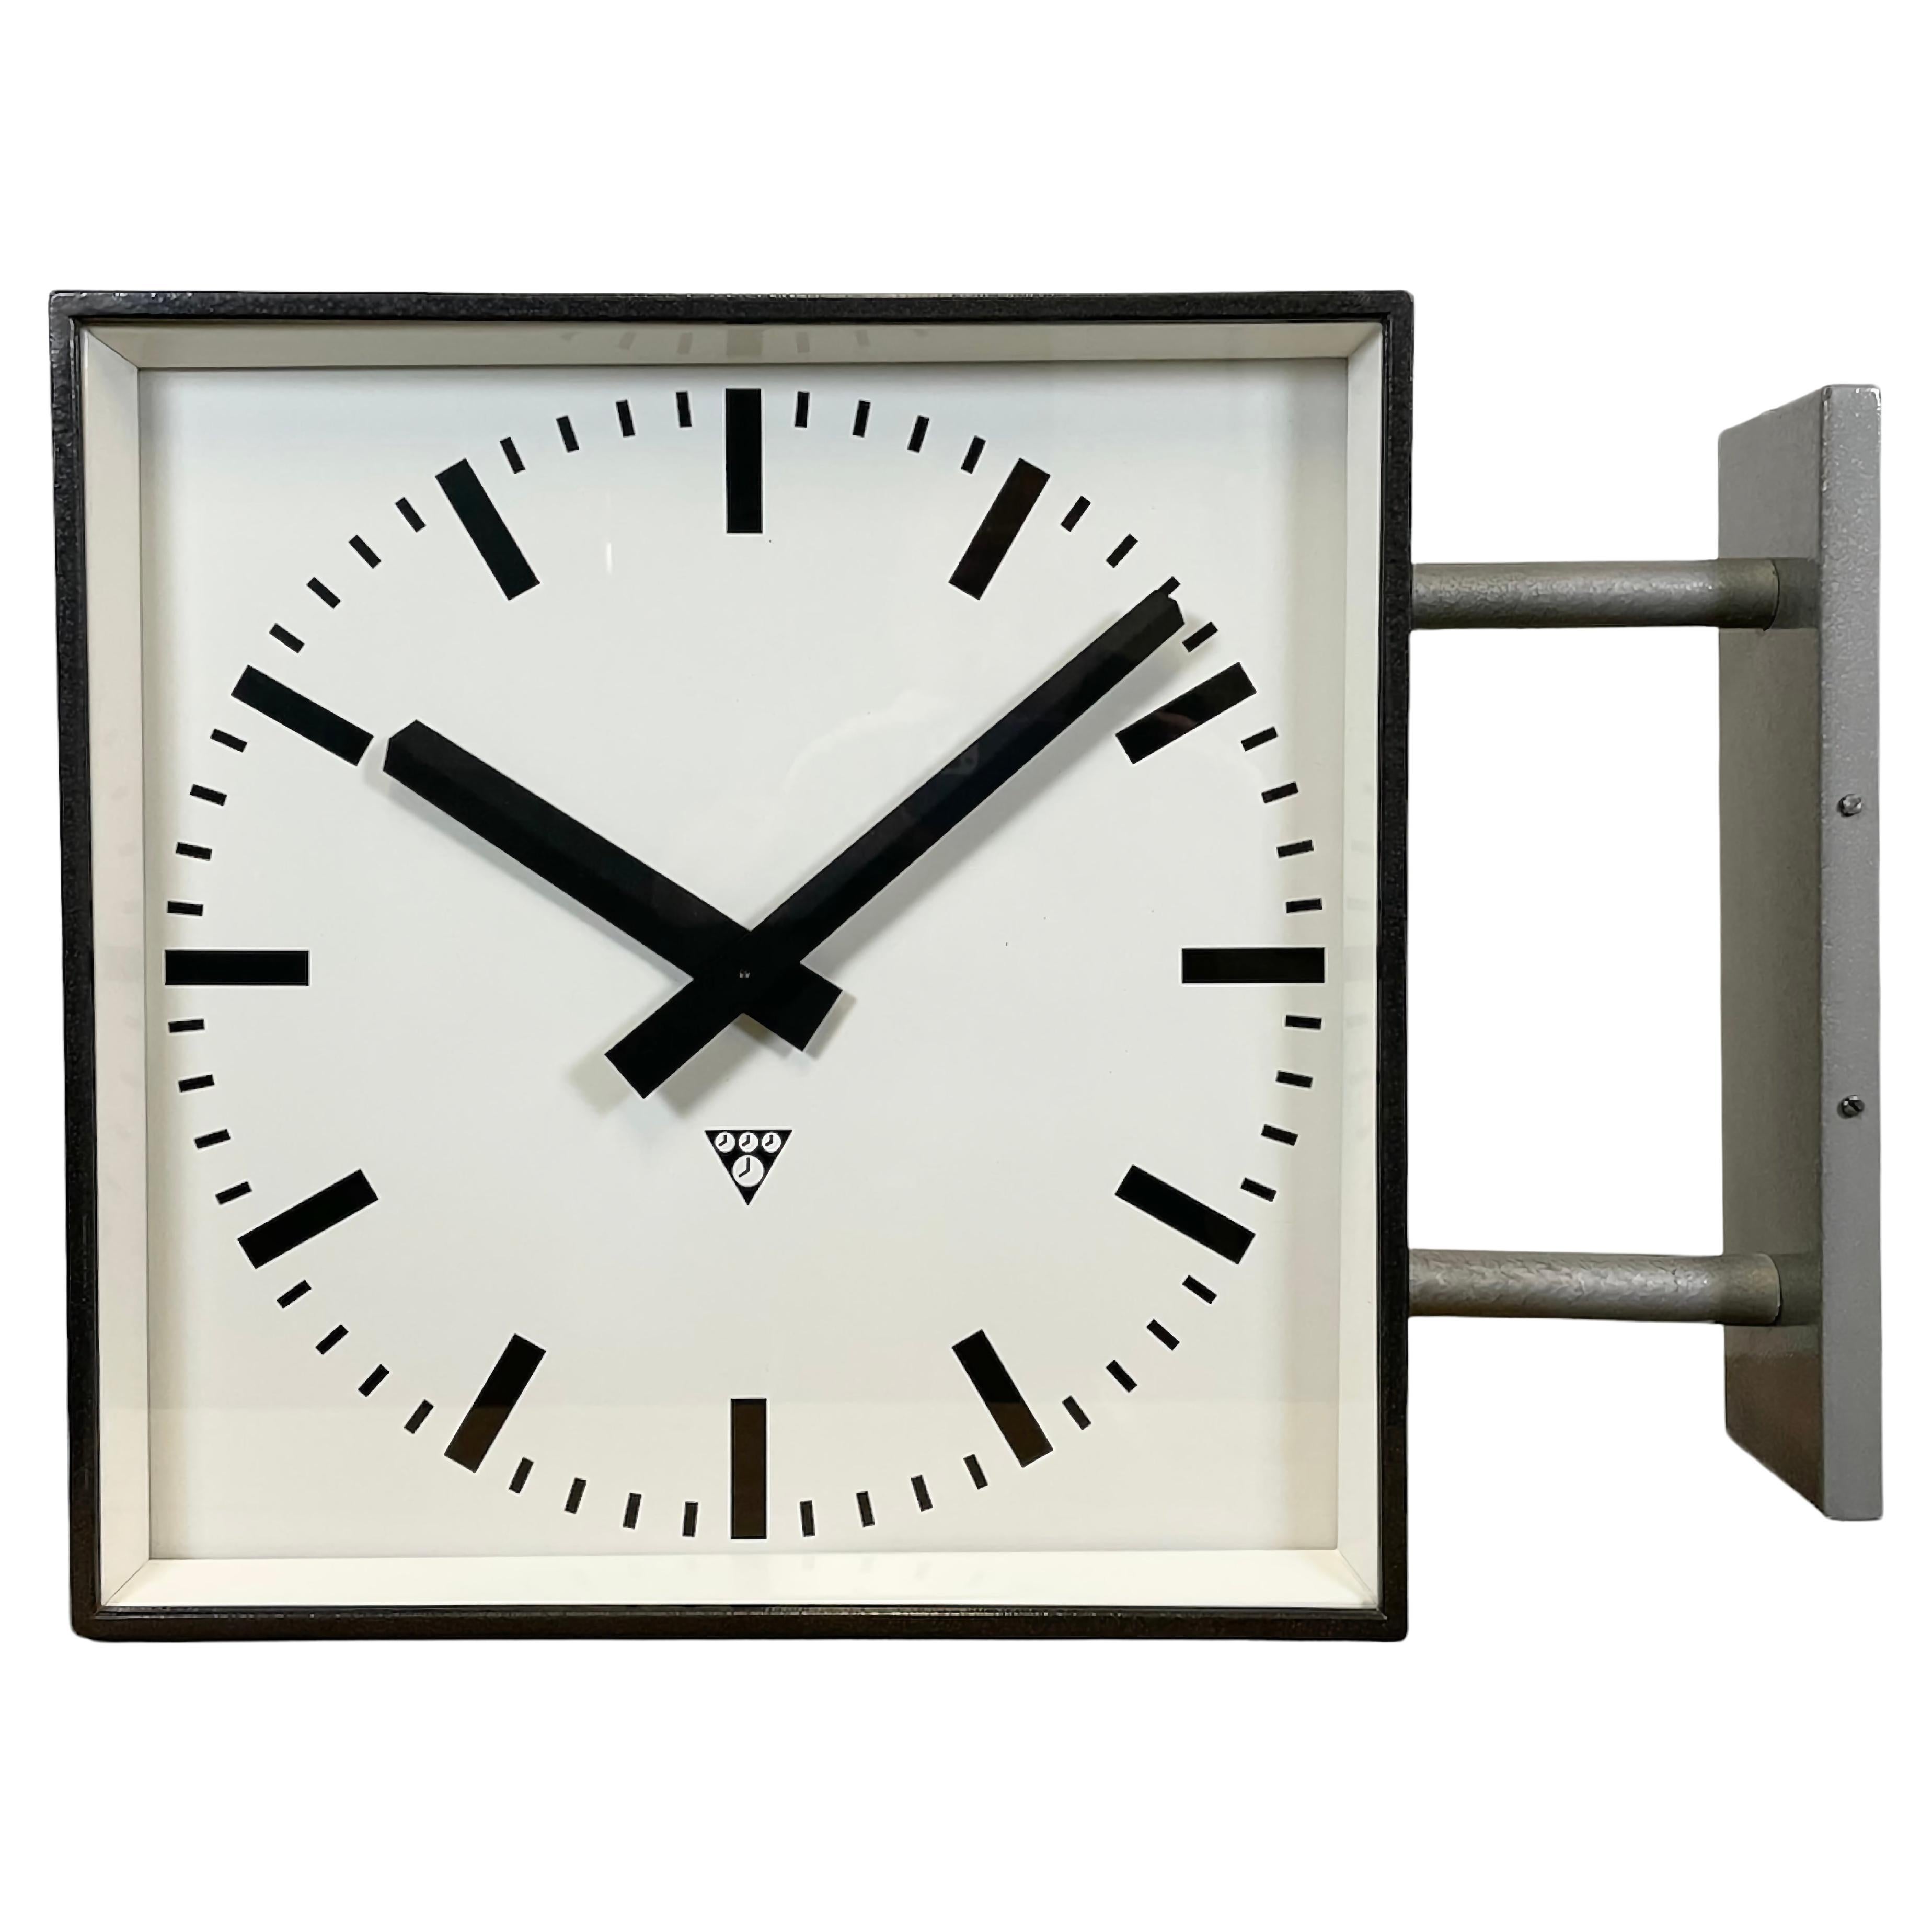 Large Square Industrial Double-Sided Factory Wall Clock from Pragotron, 1970s